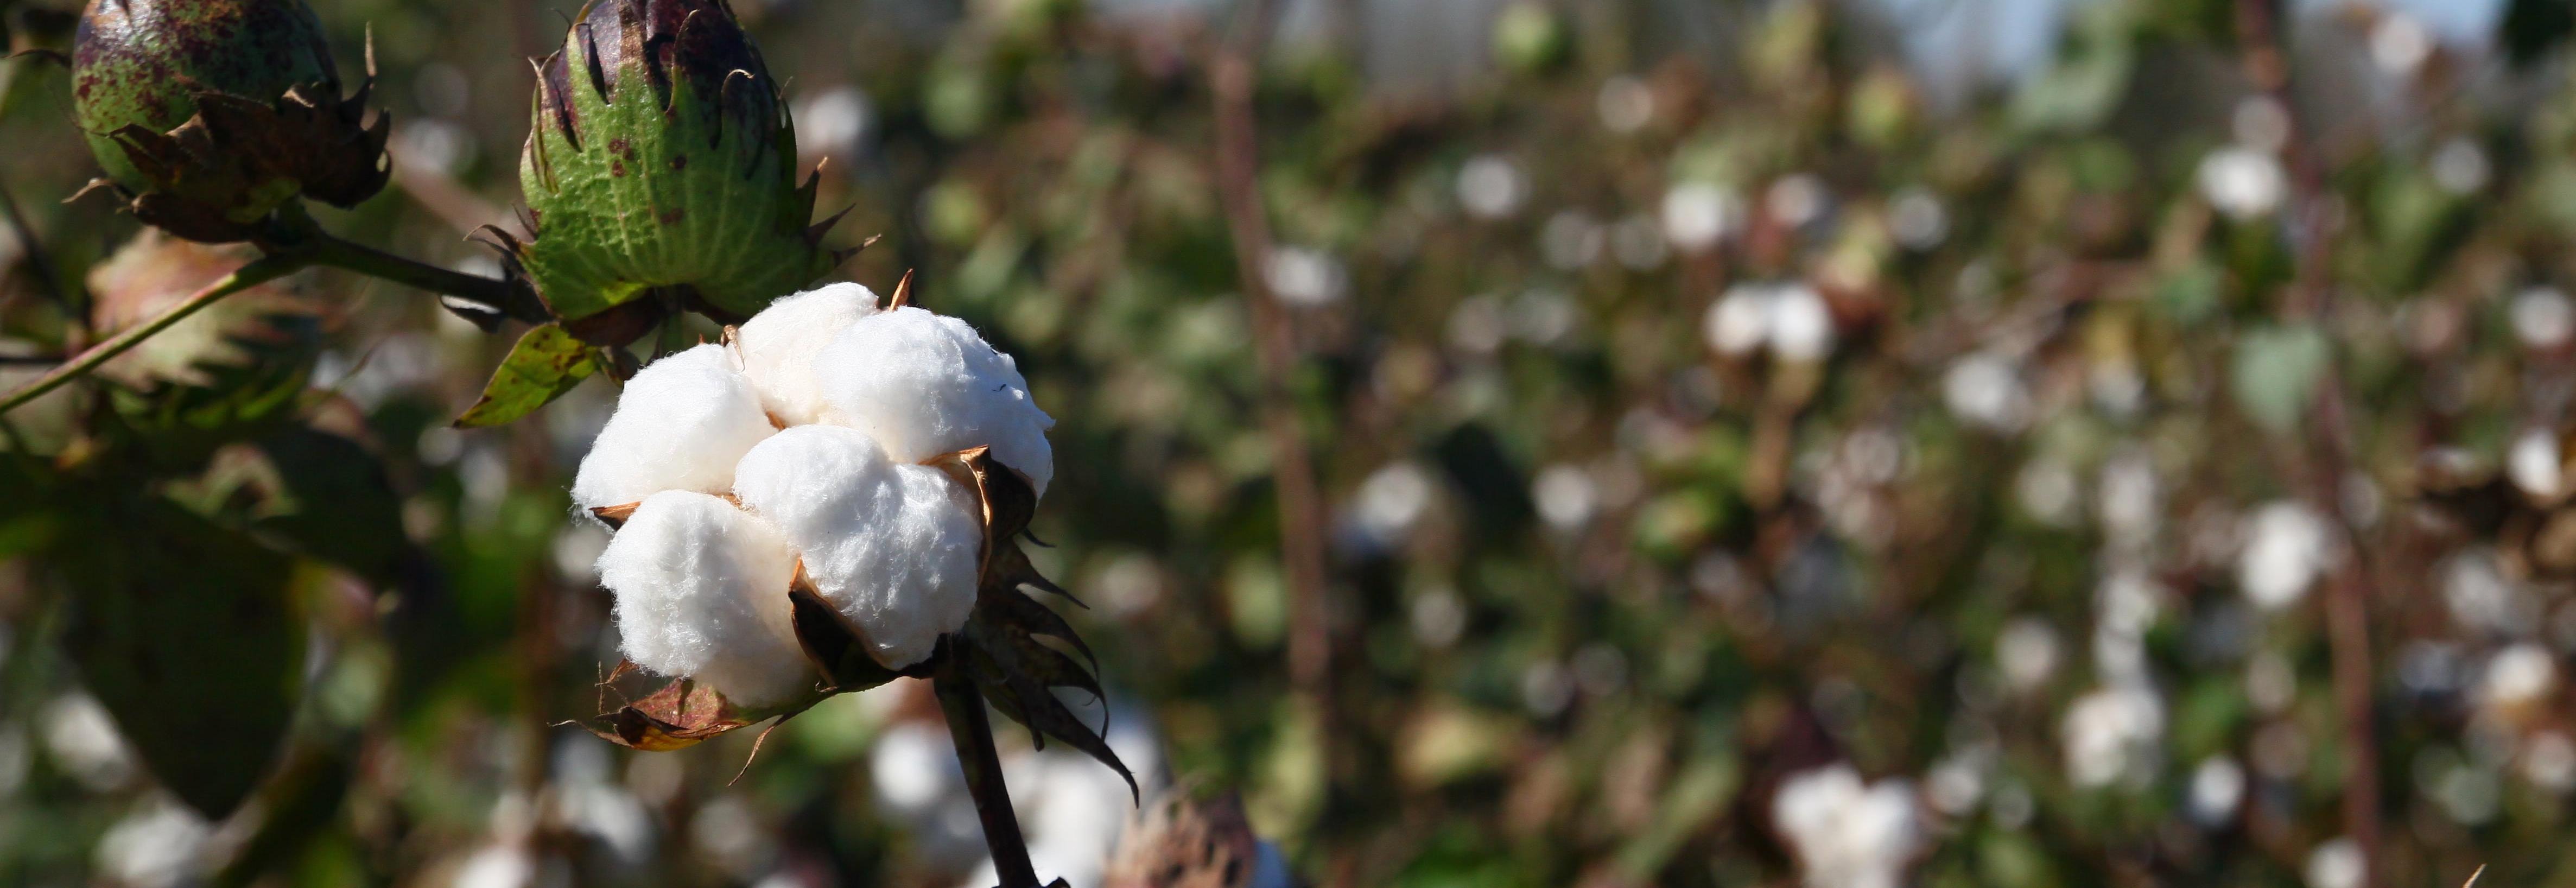 Cotton field with close-up of cotton bud in foreground